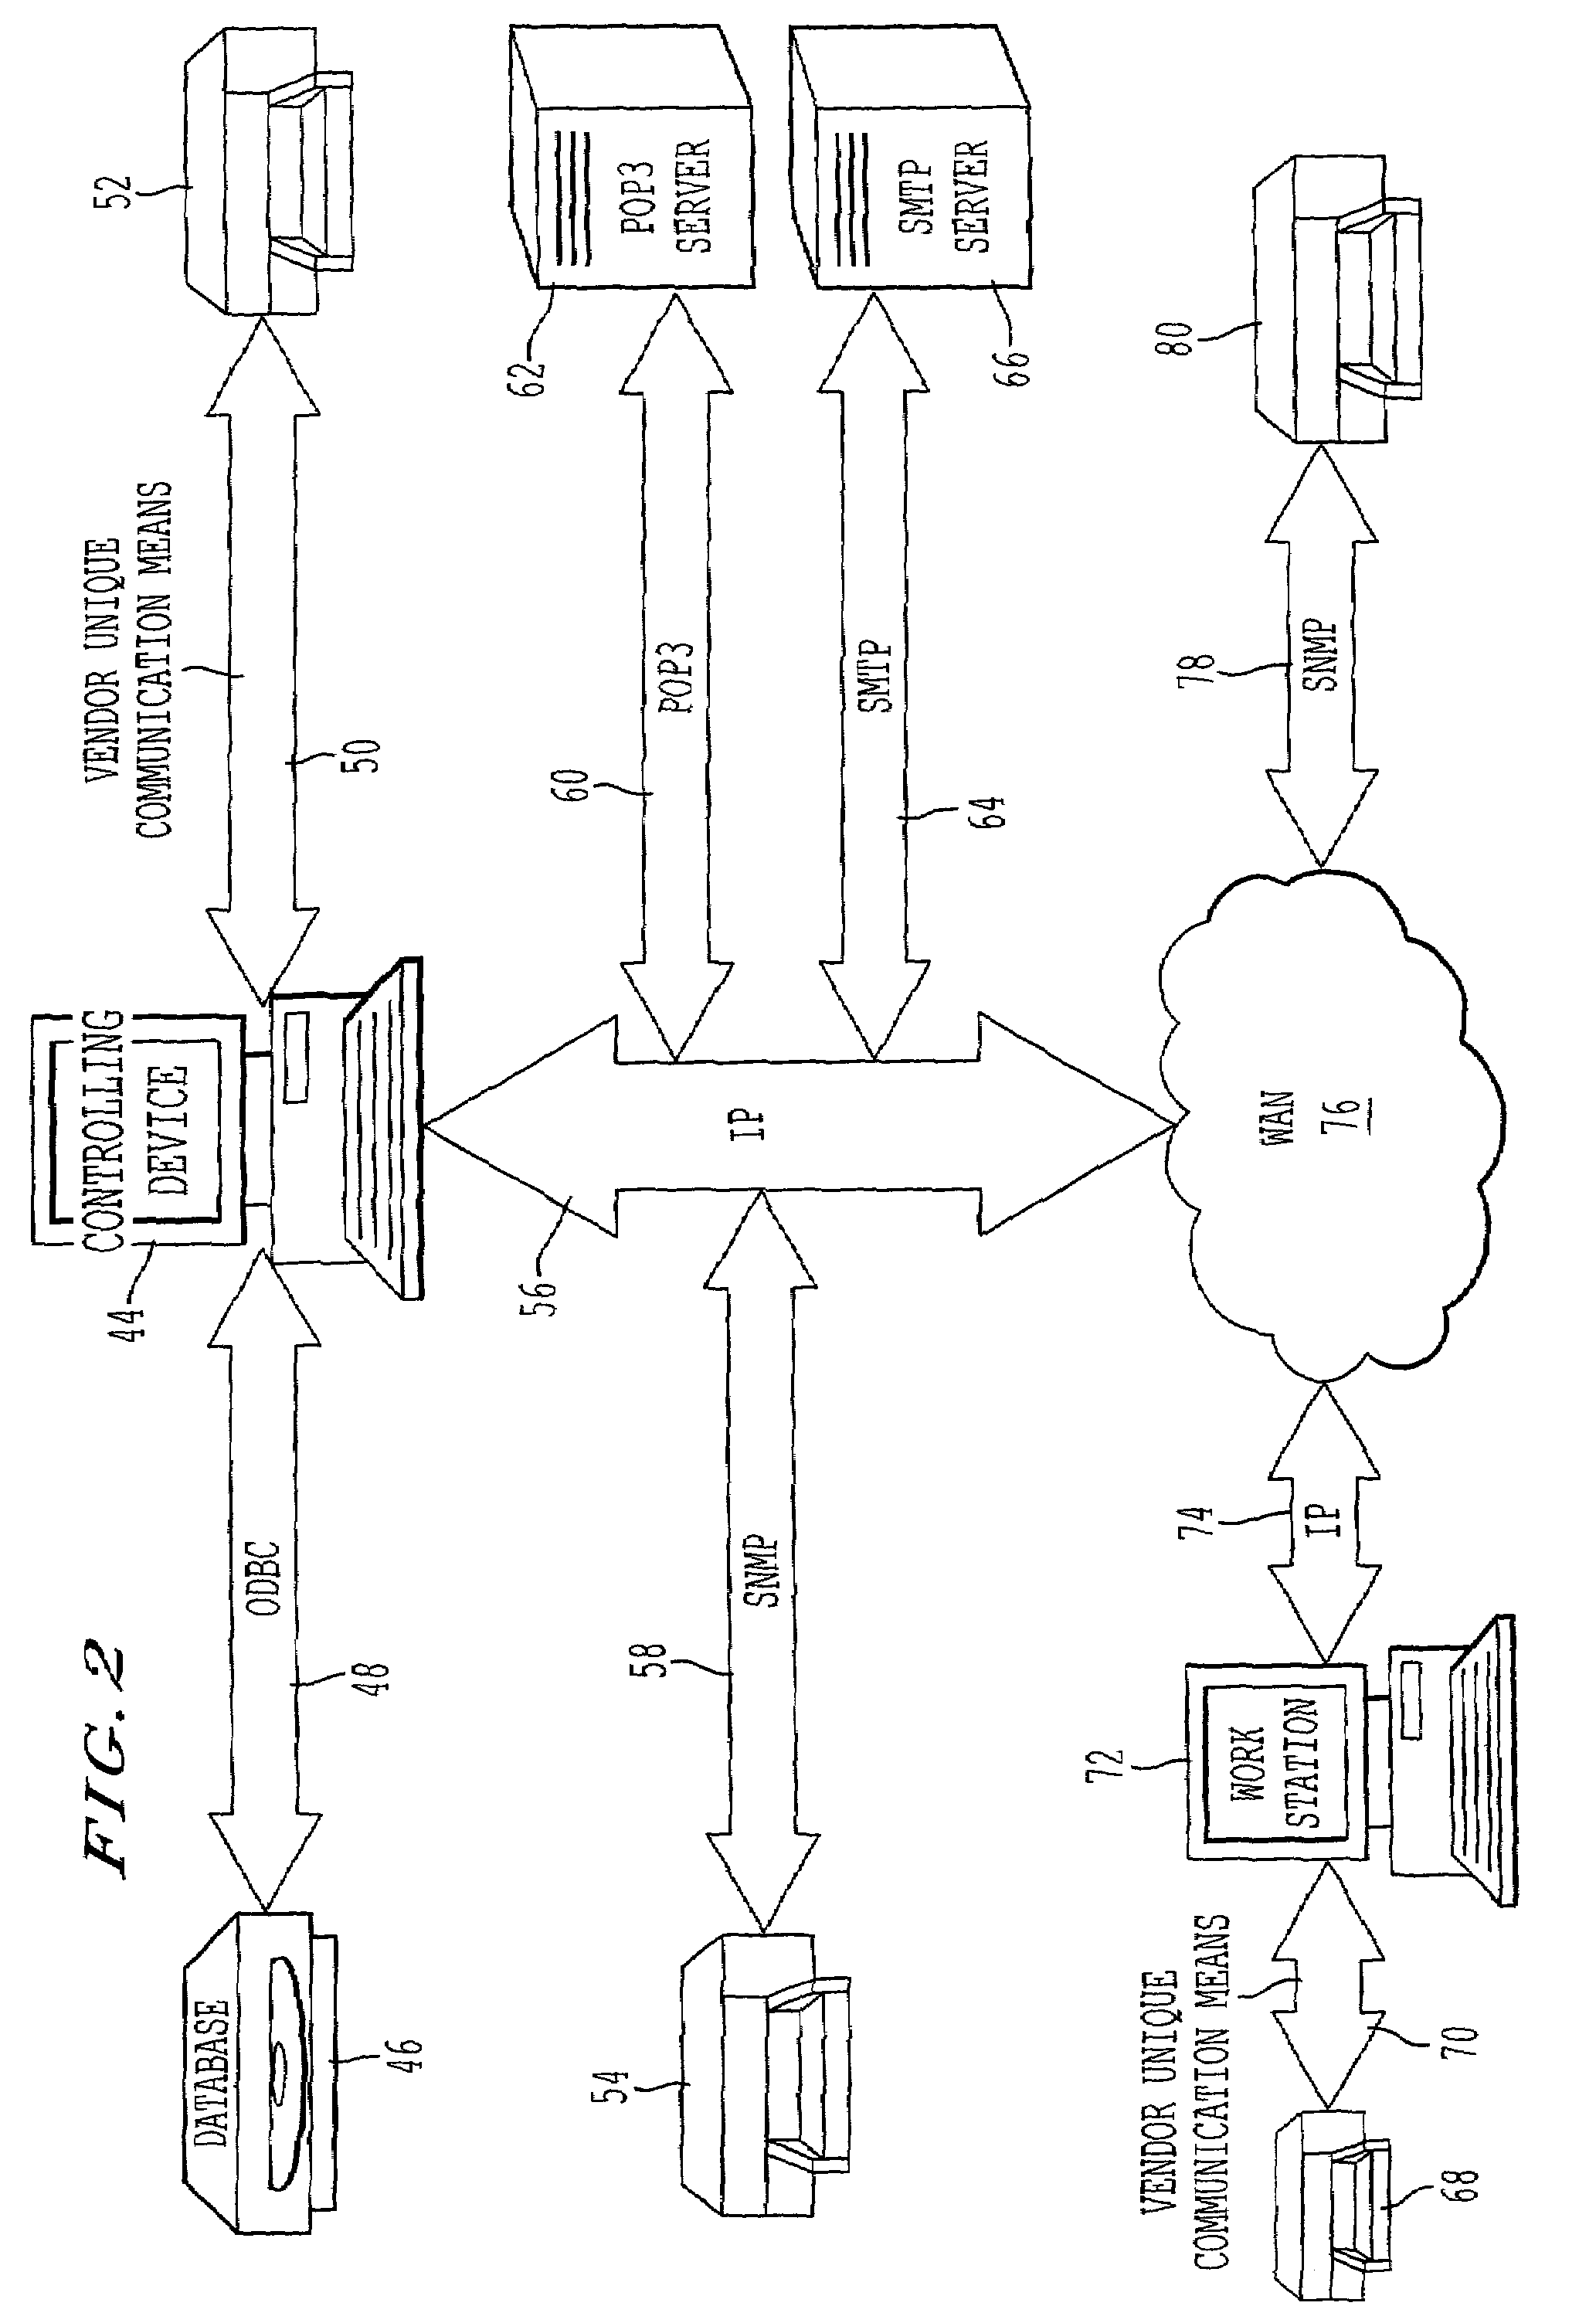 Method for obtaining an identifier of a monitored device